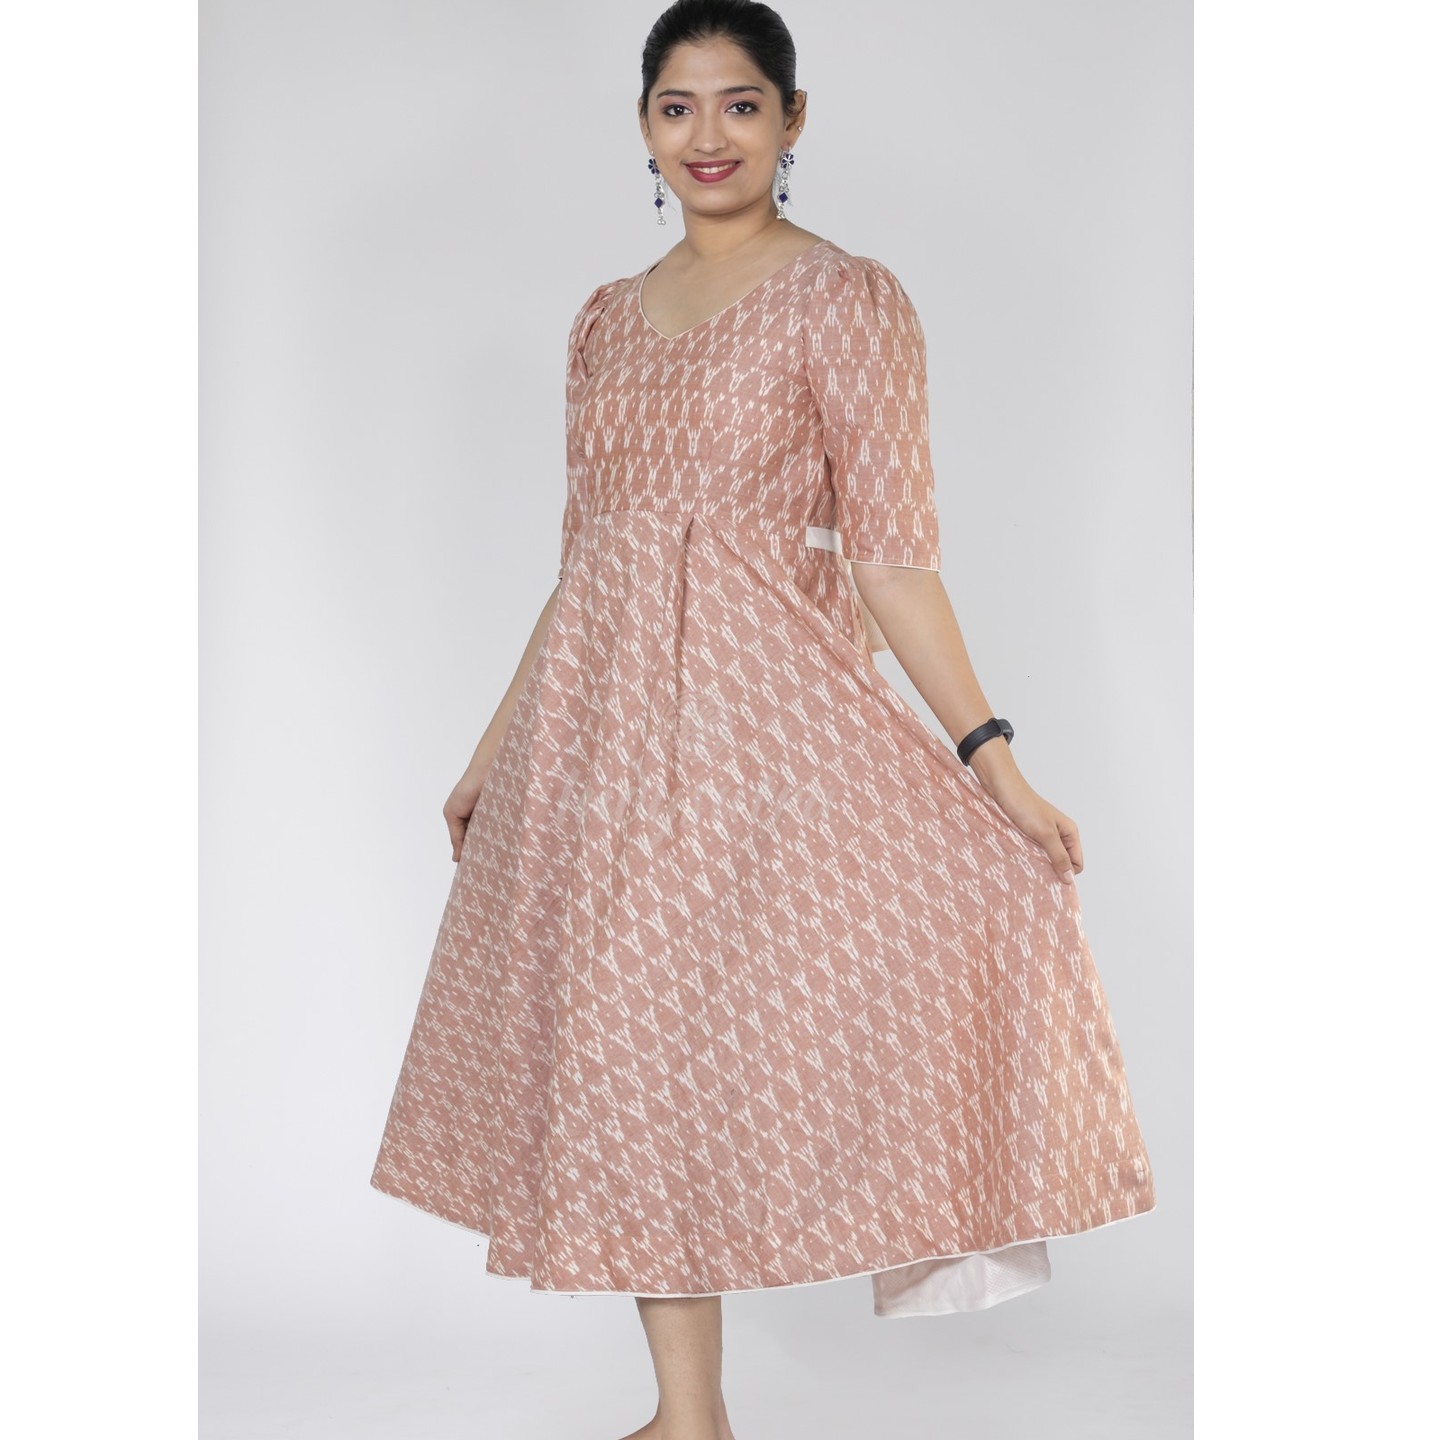 Peach and White ikat frock